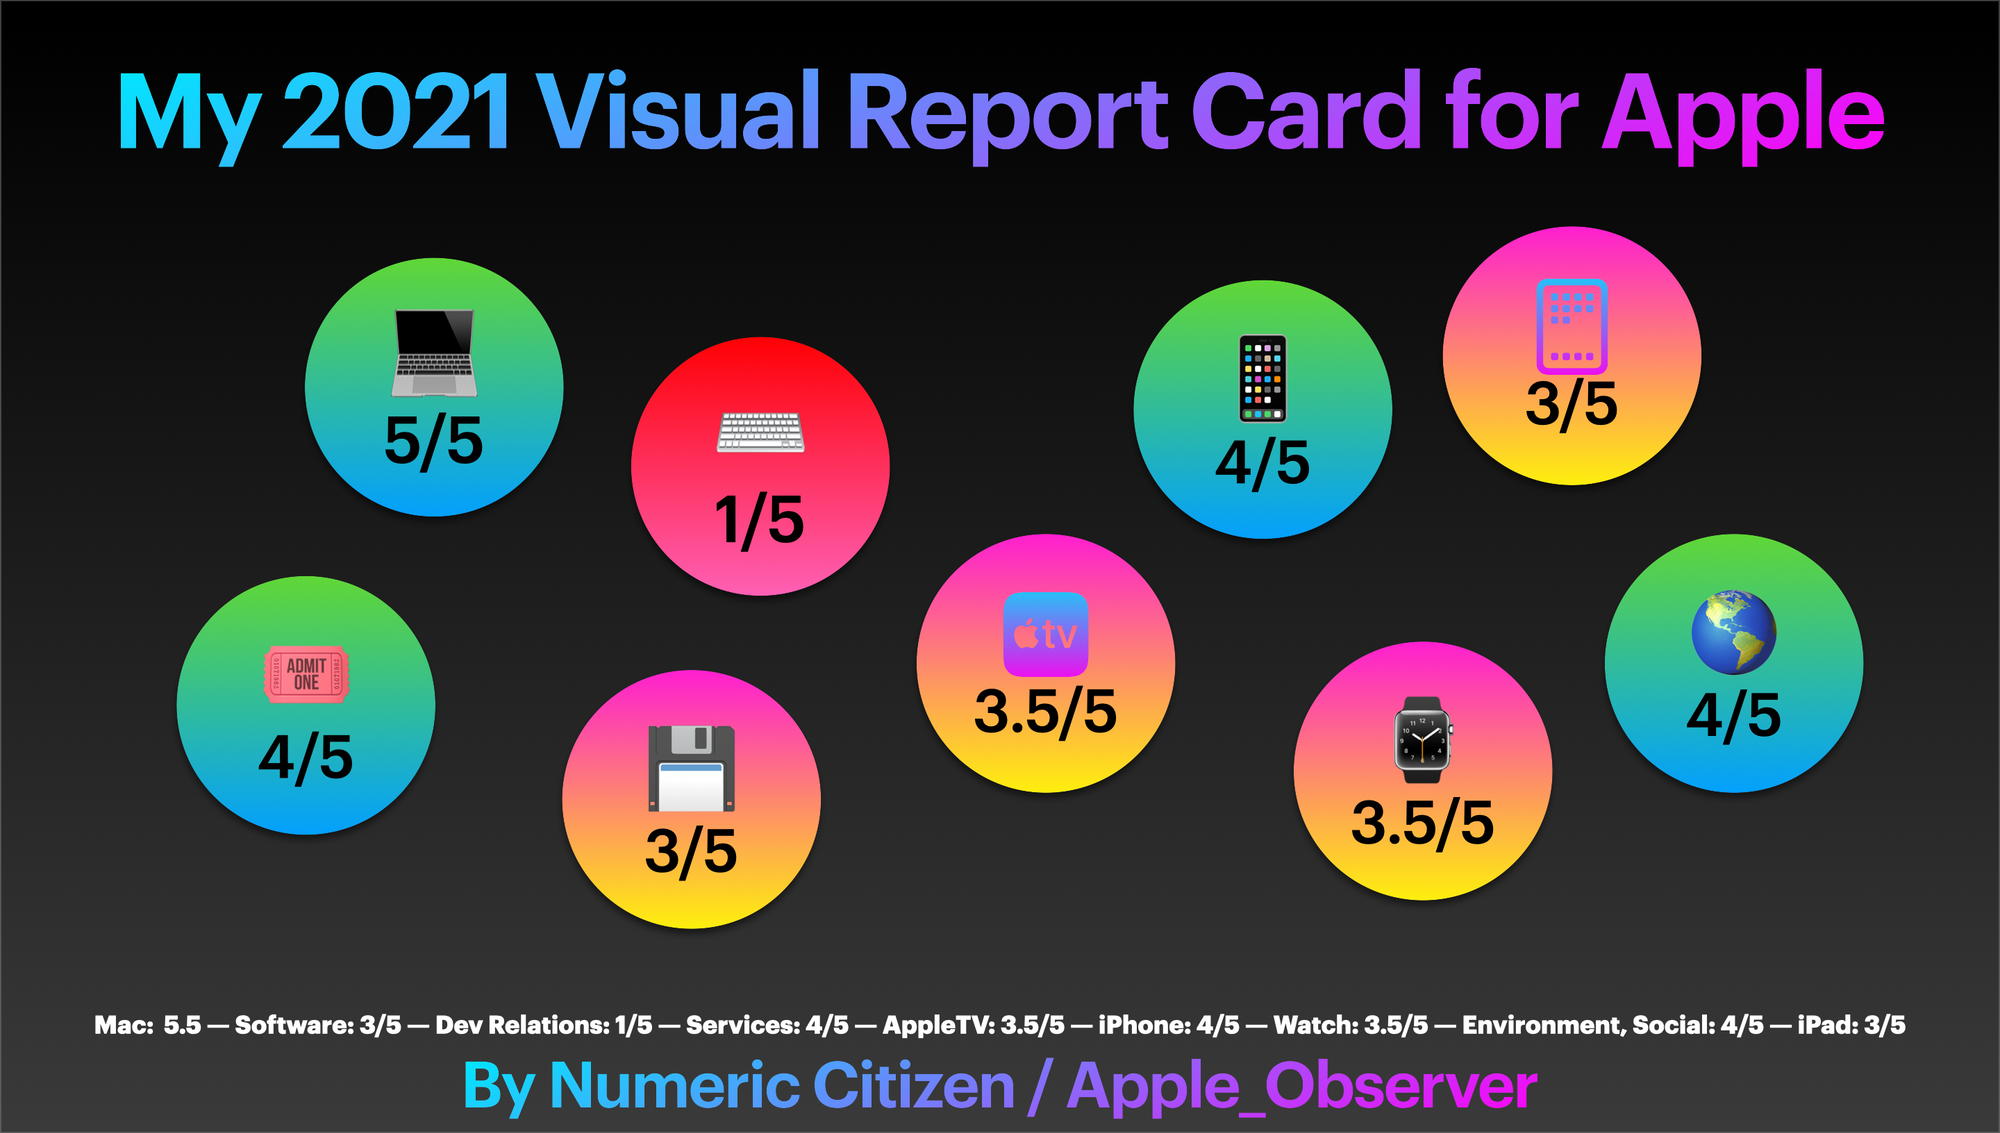 My 2021 visual report card for Apple